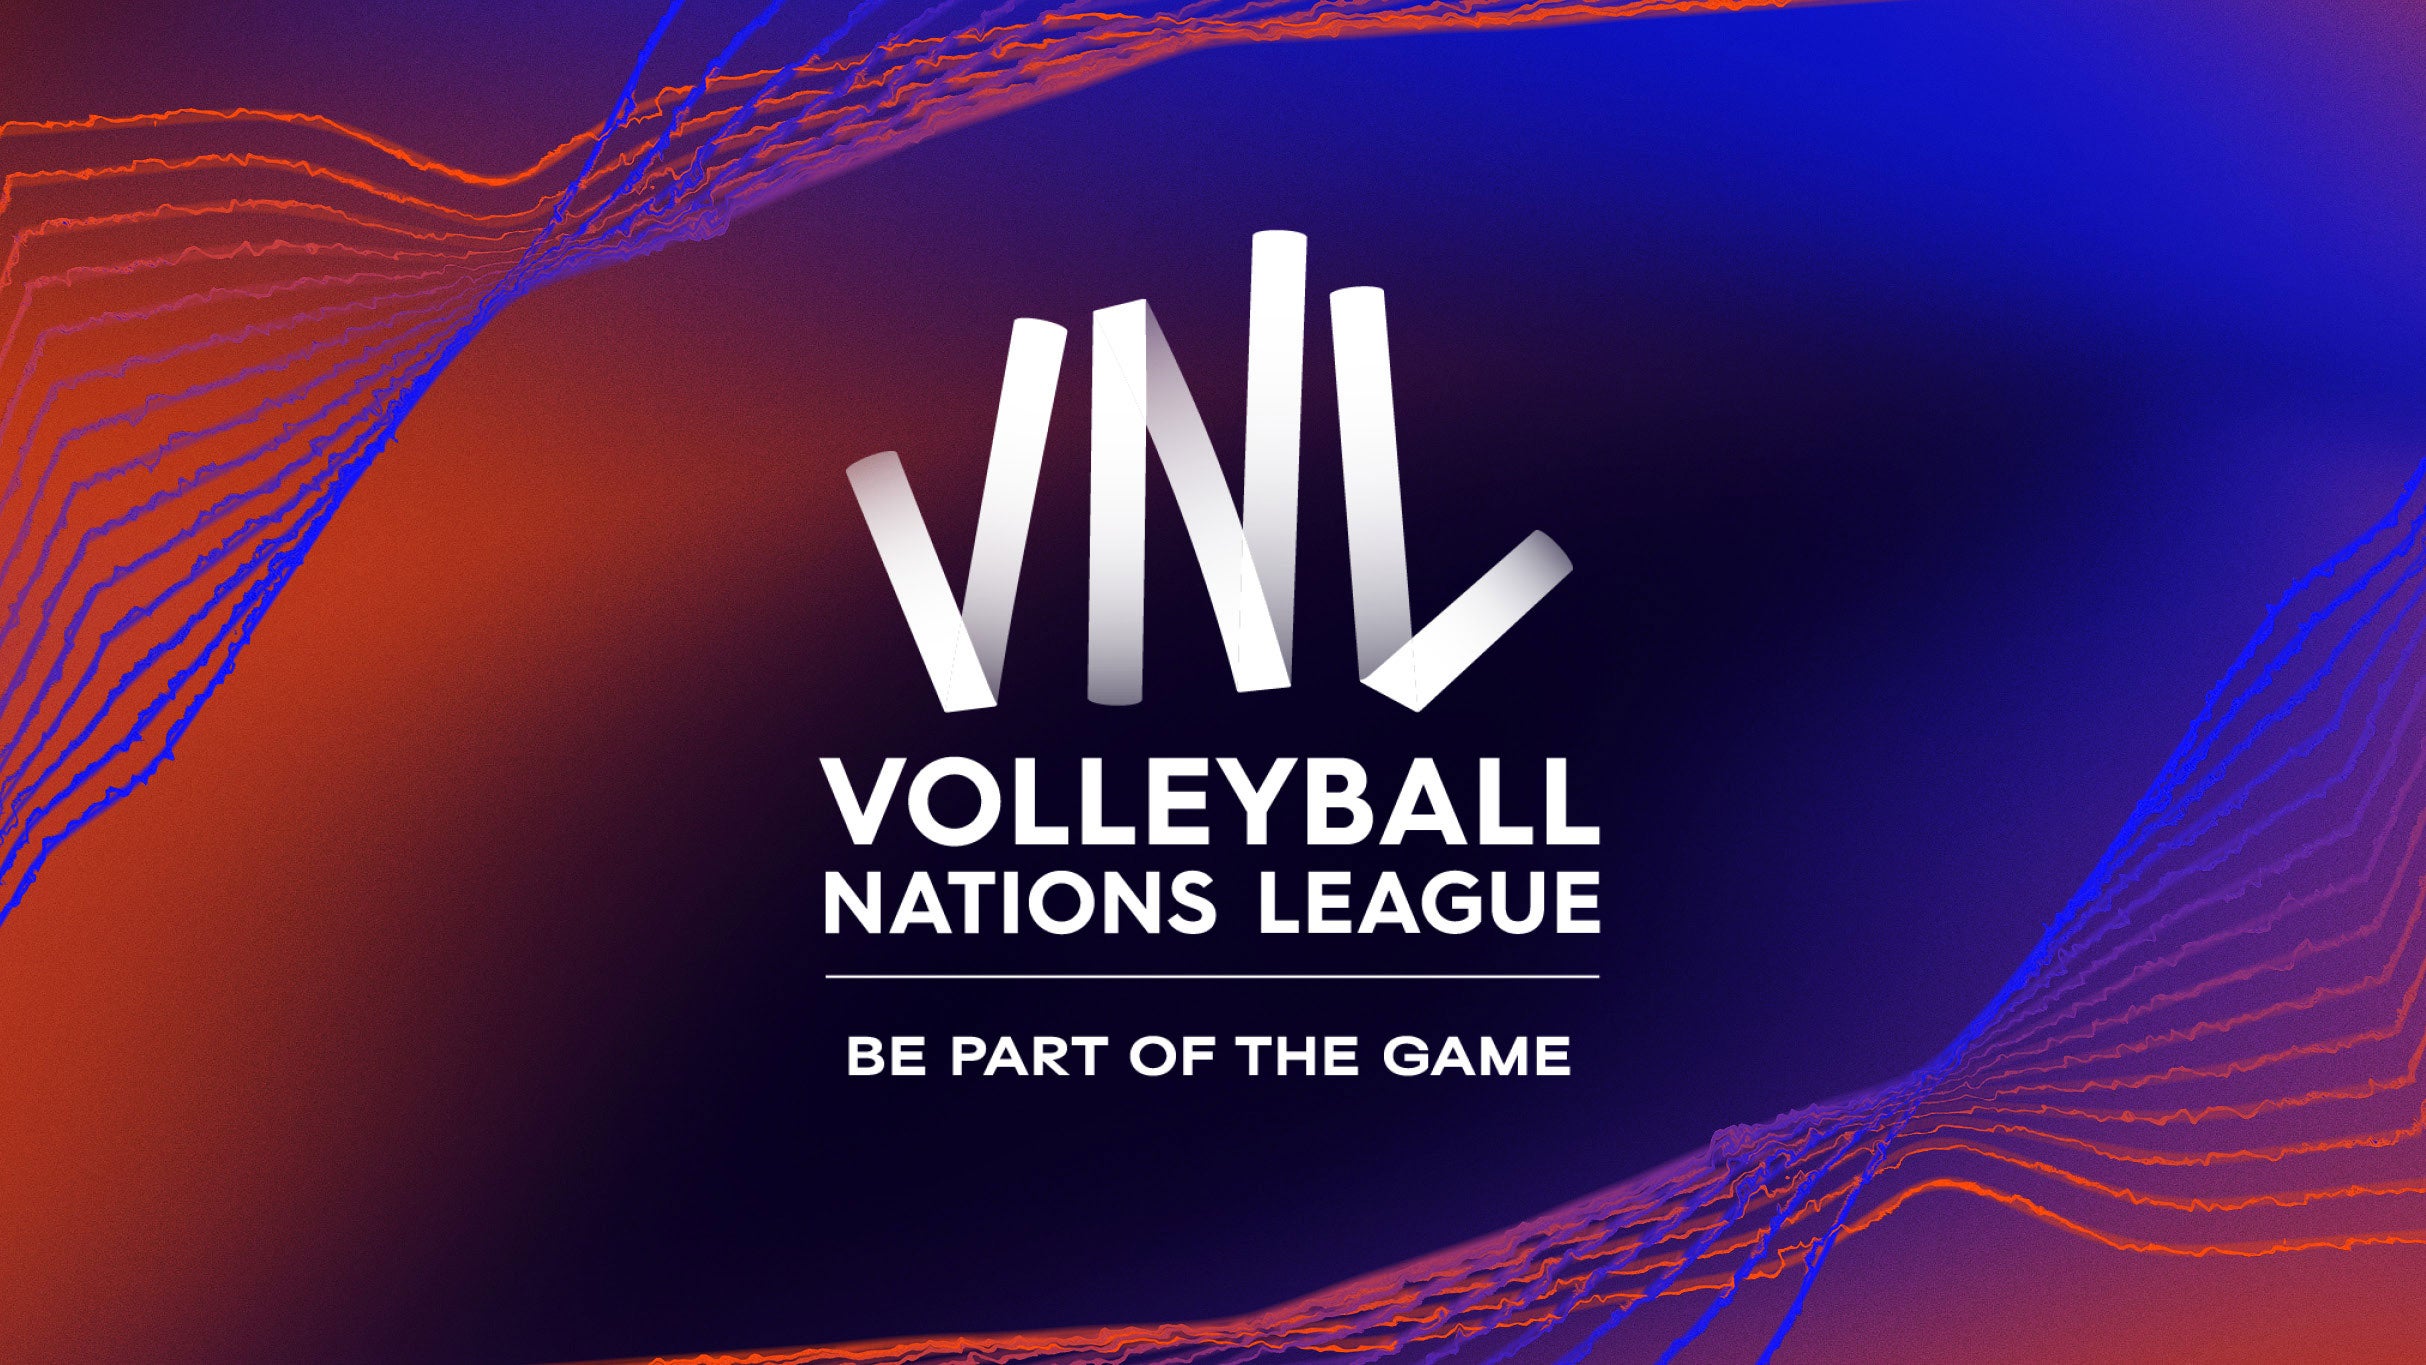 Volleyball Nations League - Match Day 3 in Ottawa promo photo for TD Place Insider presale offer code